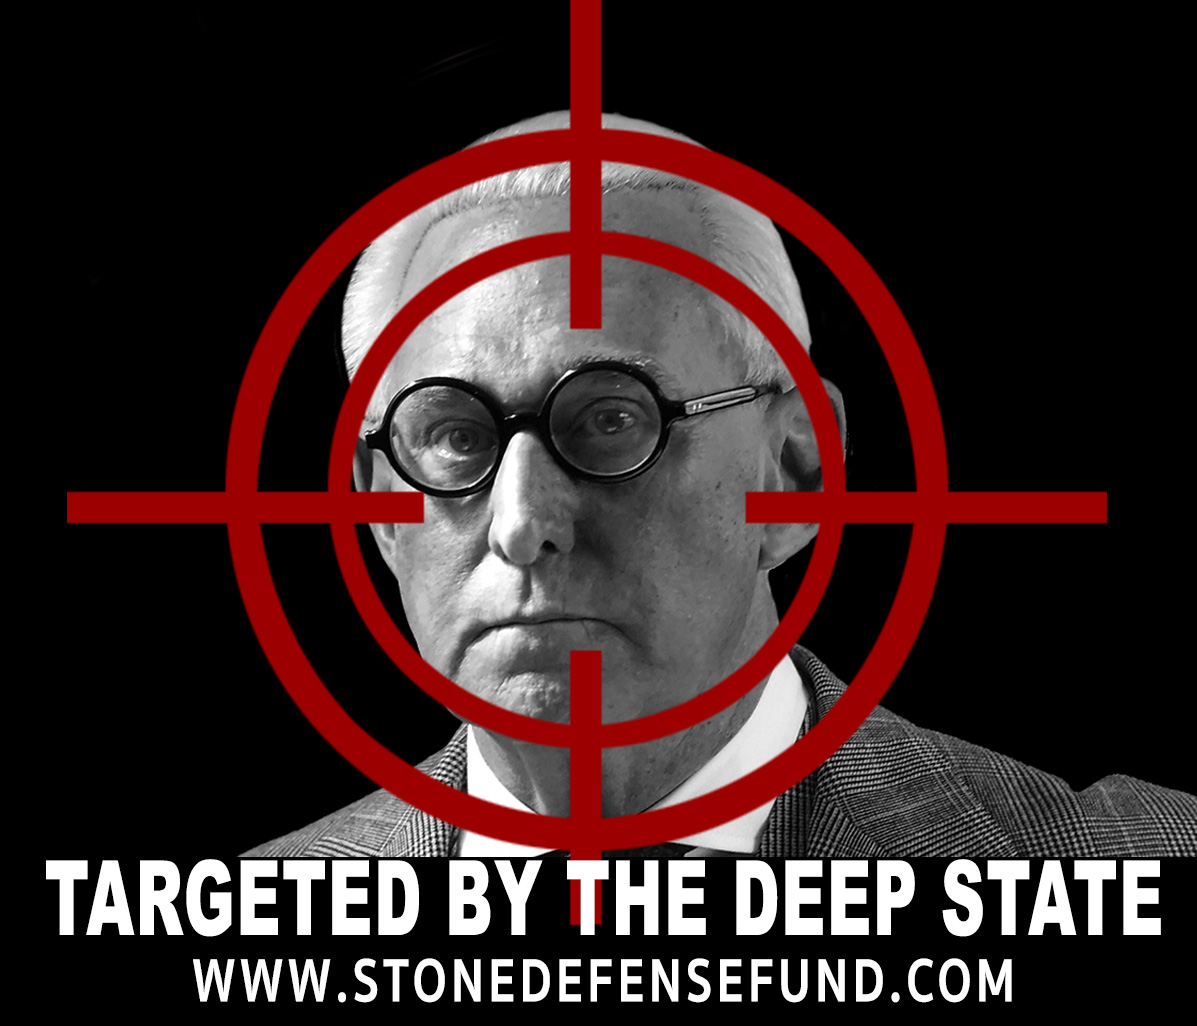 Image: Bombshell: New texts support Roger Stone’s claims regarding backchannel to Wikileaks even as Mueller still targeting him